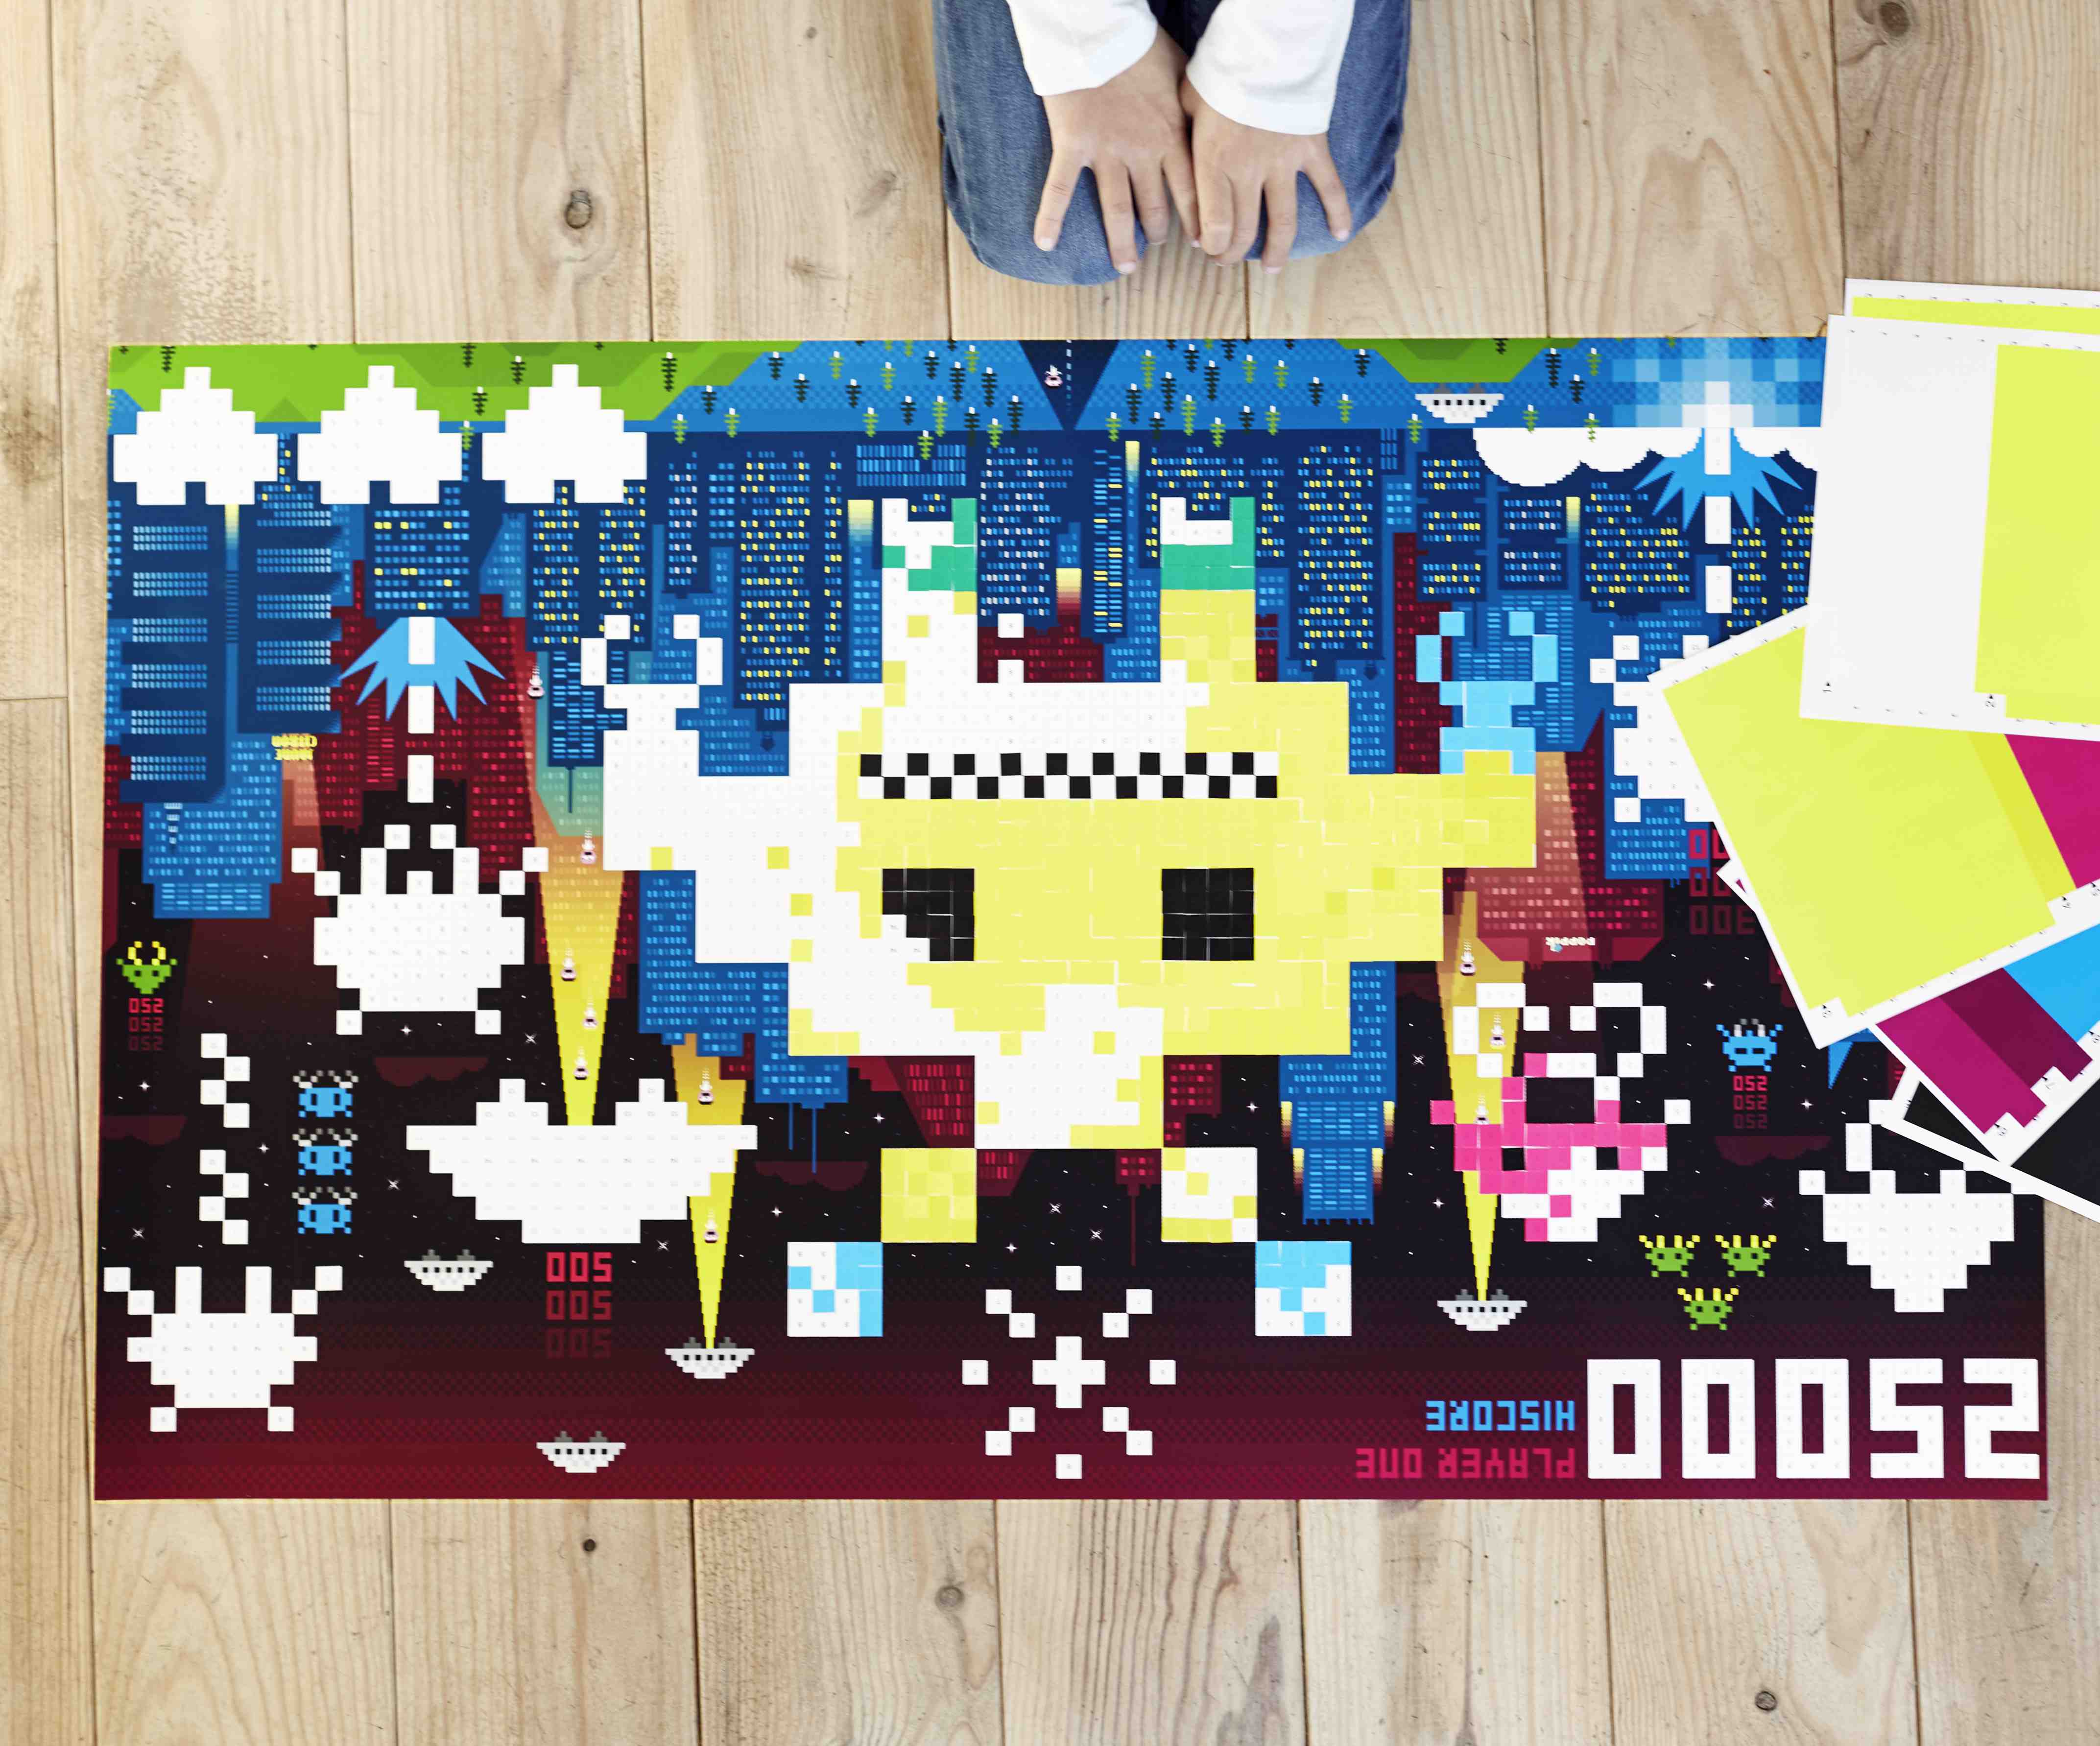 Large Poster with 1600 stickers – Video Game